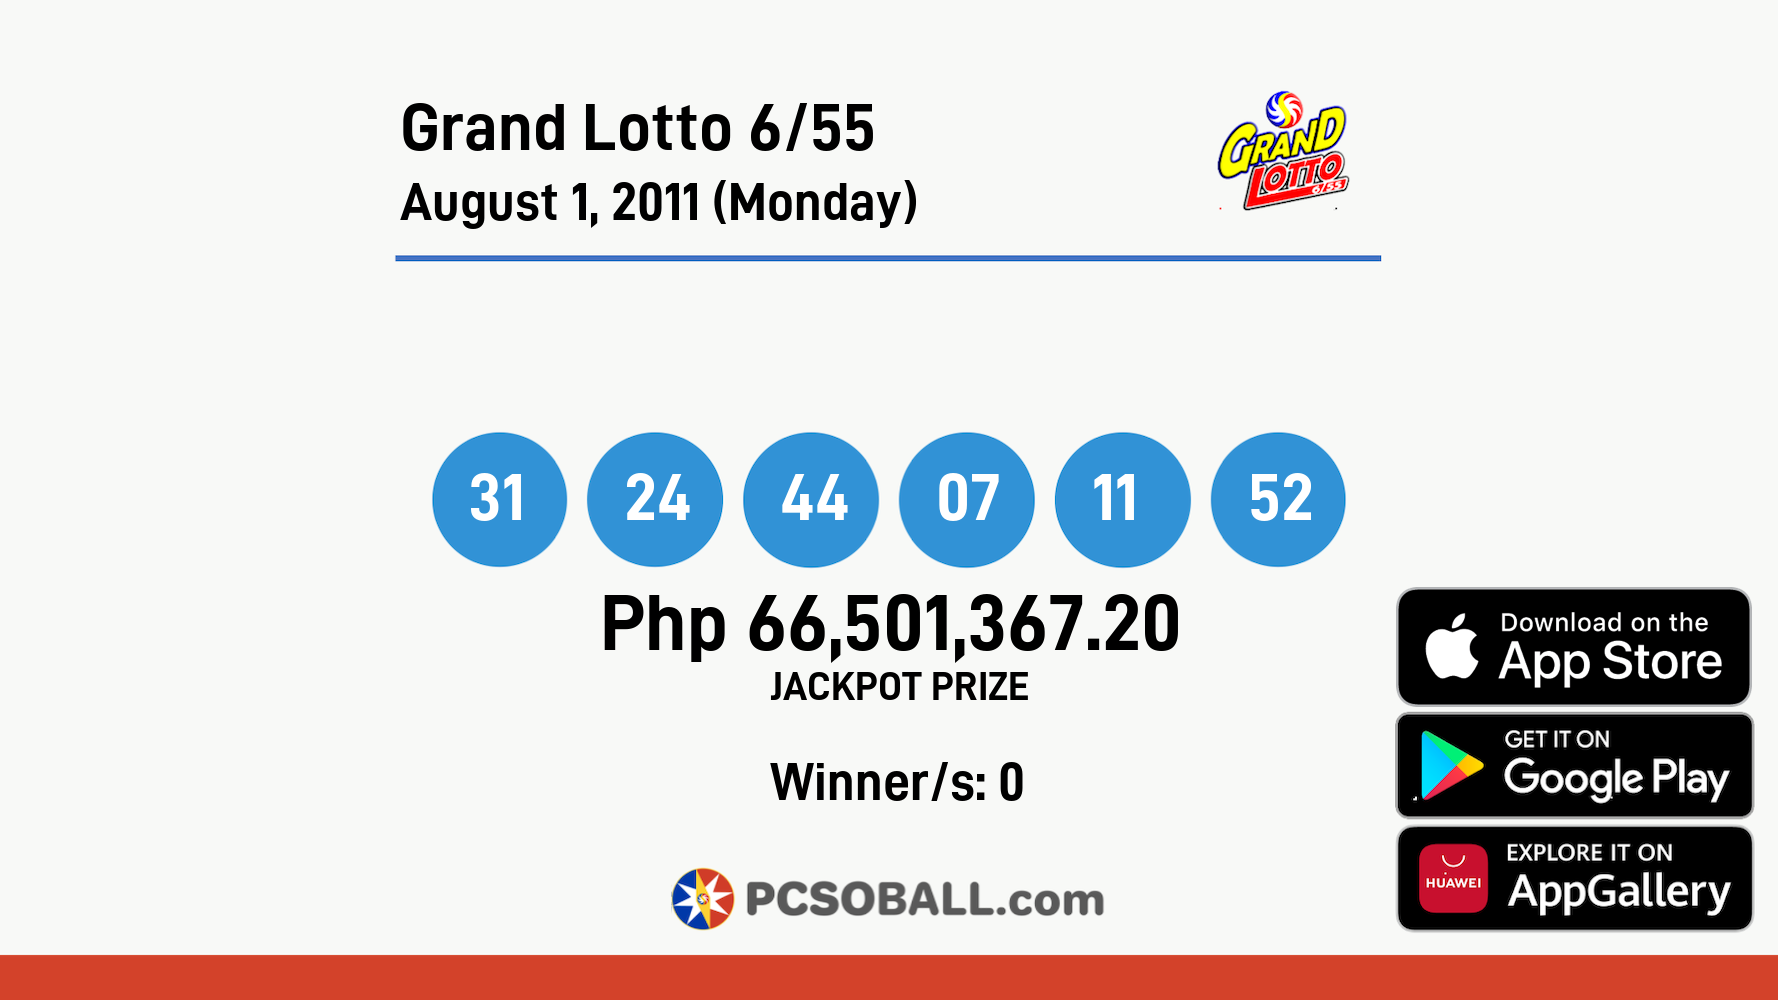 Grand Lotto 6/55 August 1, 2011 (Monday) Result